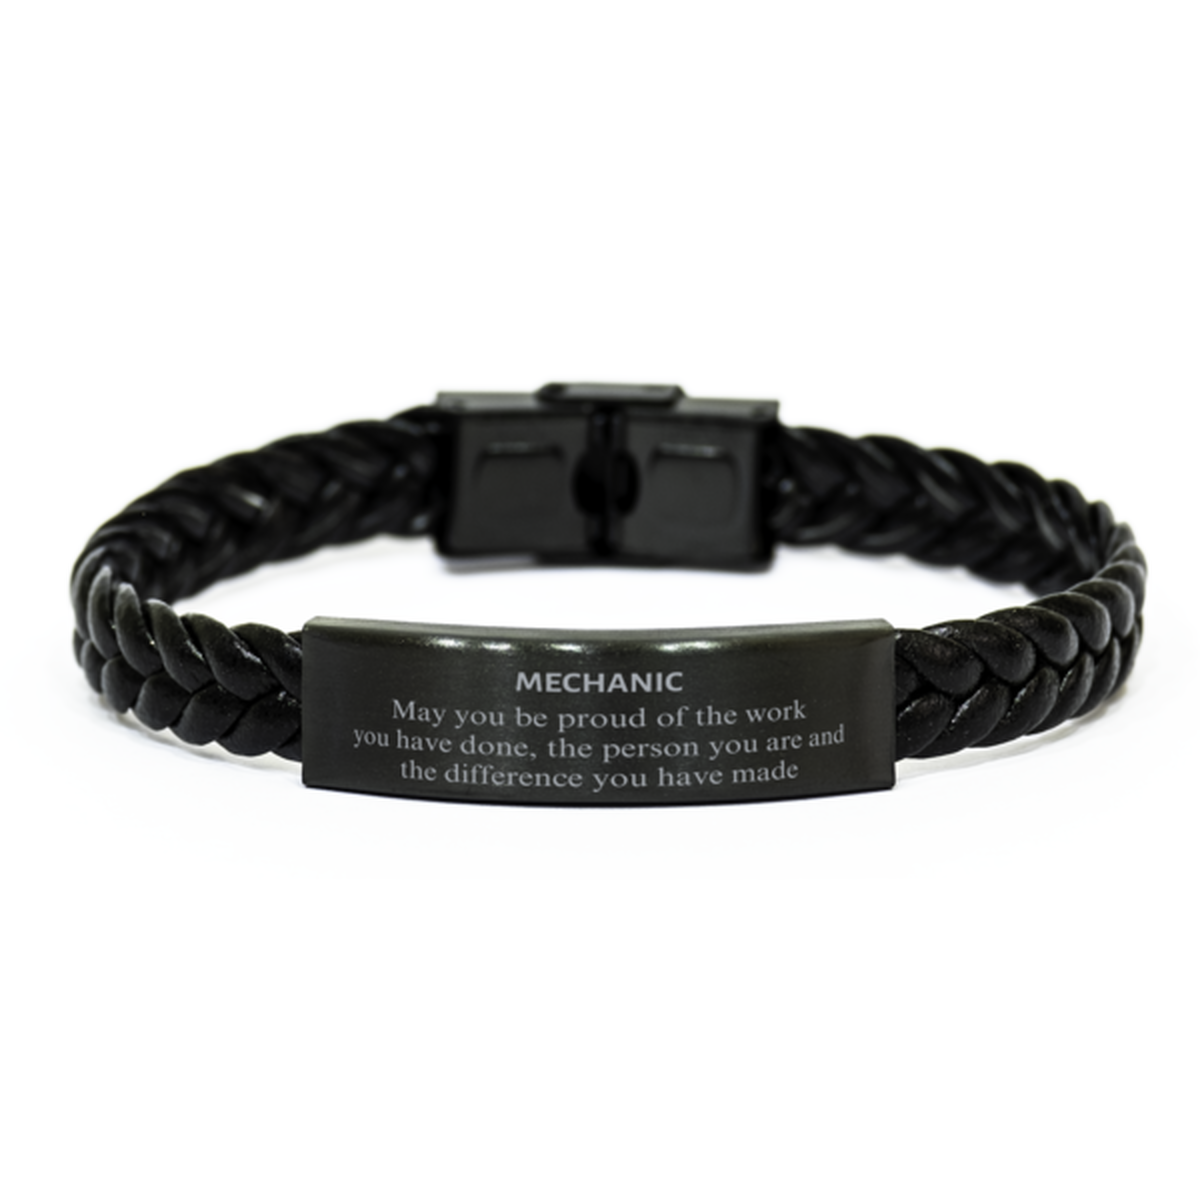 Mechanic May you be proud of the work you have done, Retirement Mechanic Braided Leather Bracelet for Colleague Appreciation Gifts Amazing for Mechanic